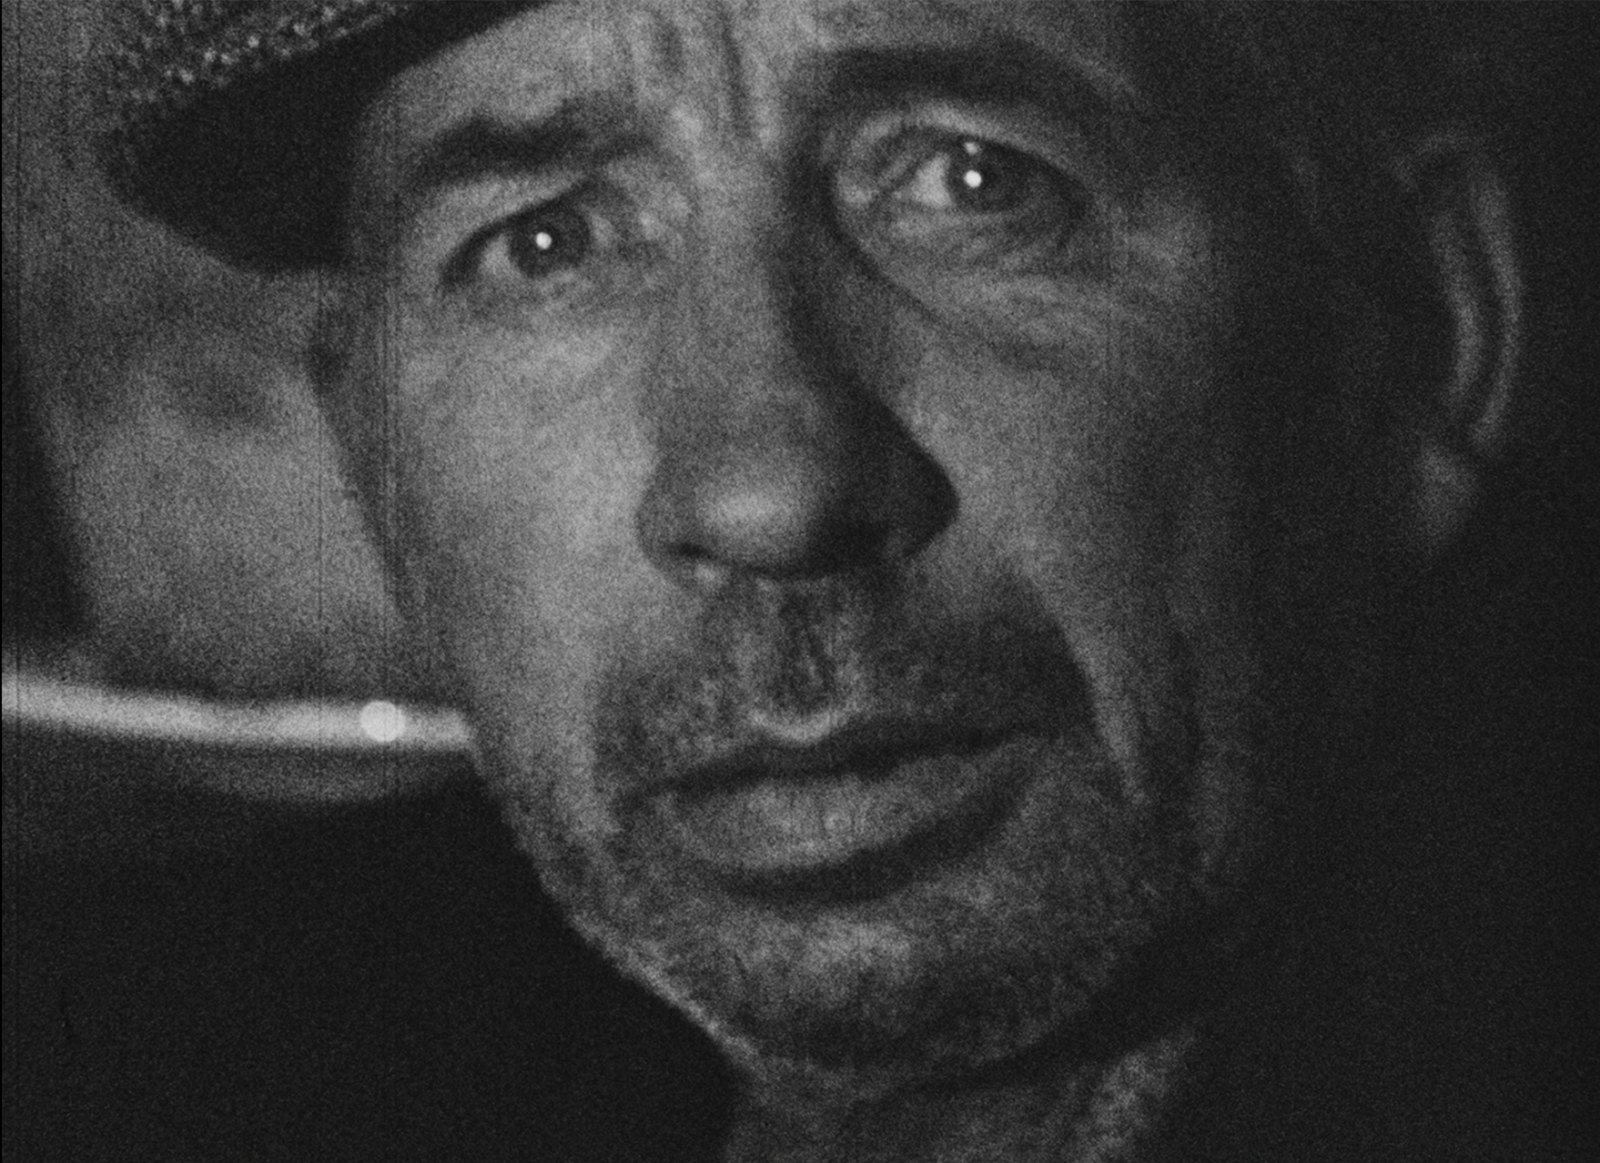 A still from Agnès Varda’s 1958 black-and-white film L’Opéra-Mouffe. Portrait of an older man with an unshaven face, head tipped slightly to the left, deep wrinkles and full lips. He looks directly at the viewer with pursed brows that speak of concern or worry. The image is cropped slightly above his brow to reveal a tweed driver’s cap tipped to one side.